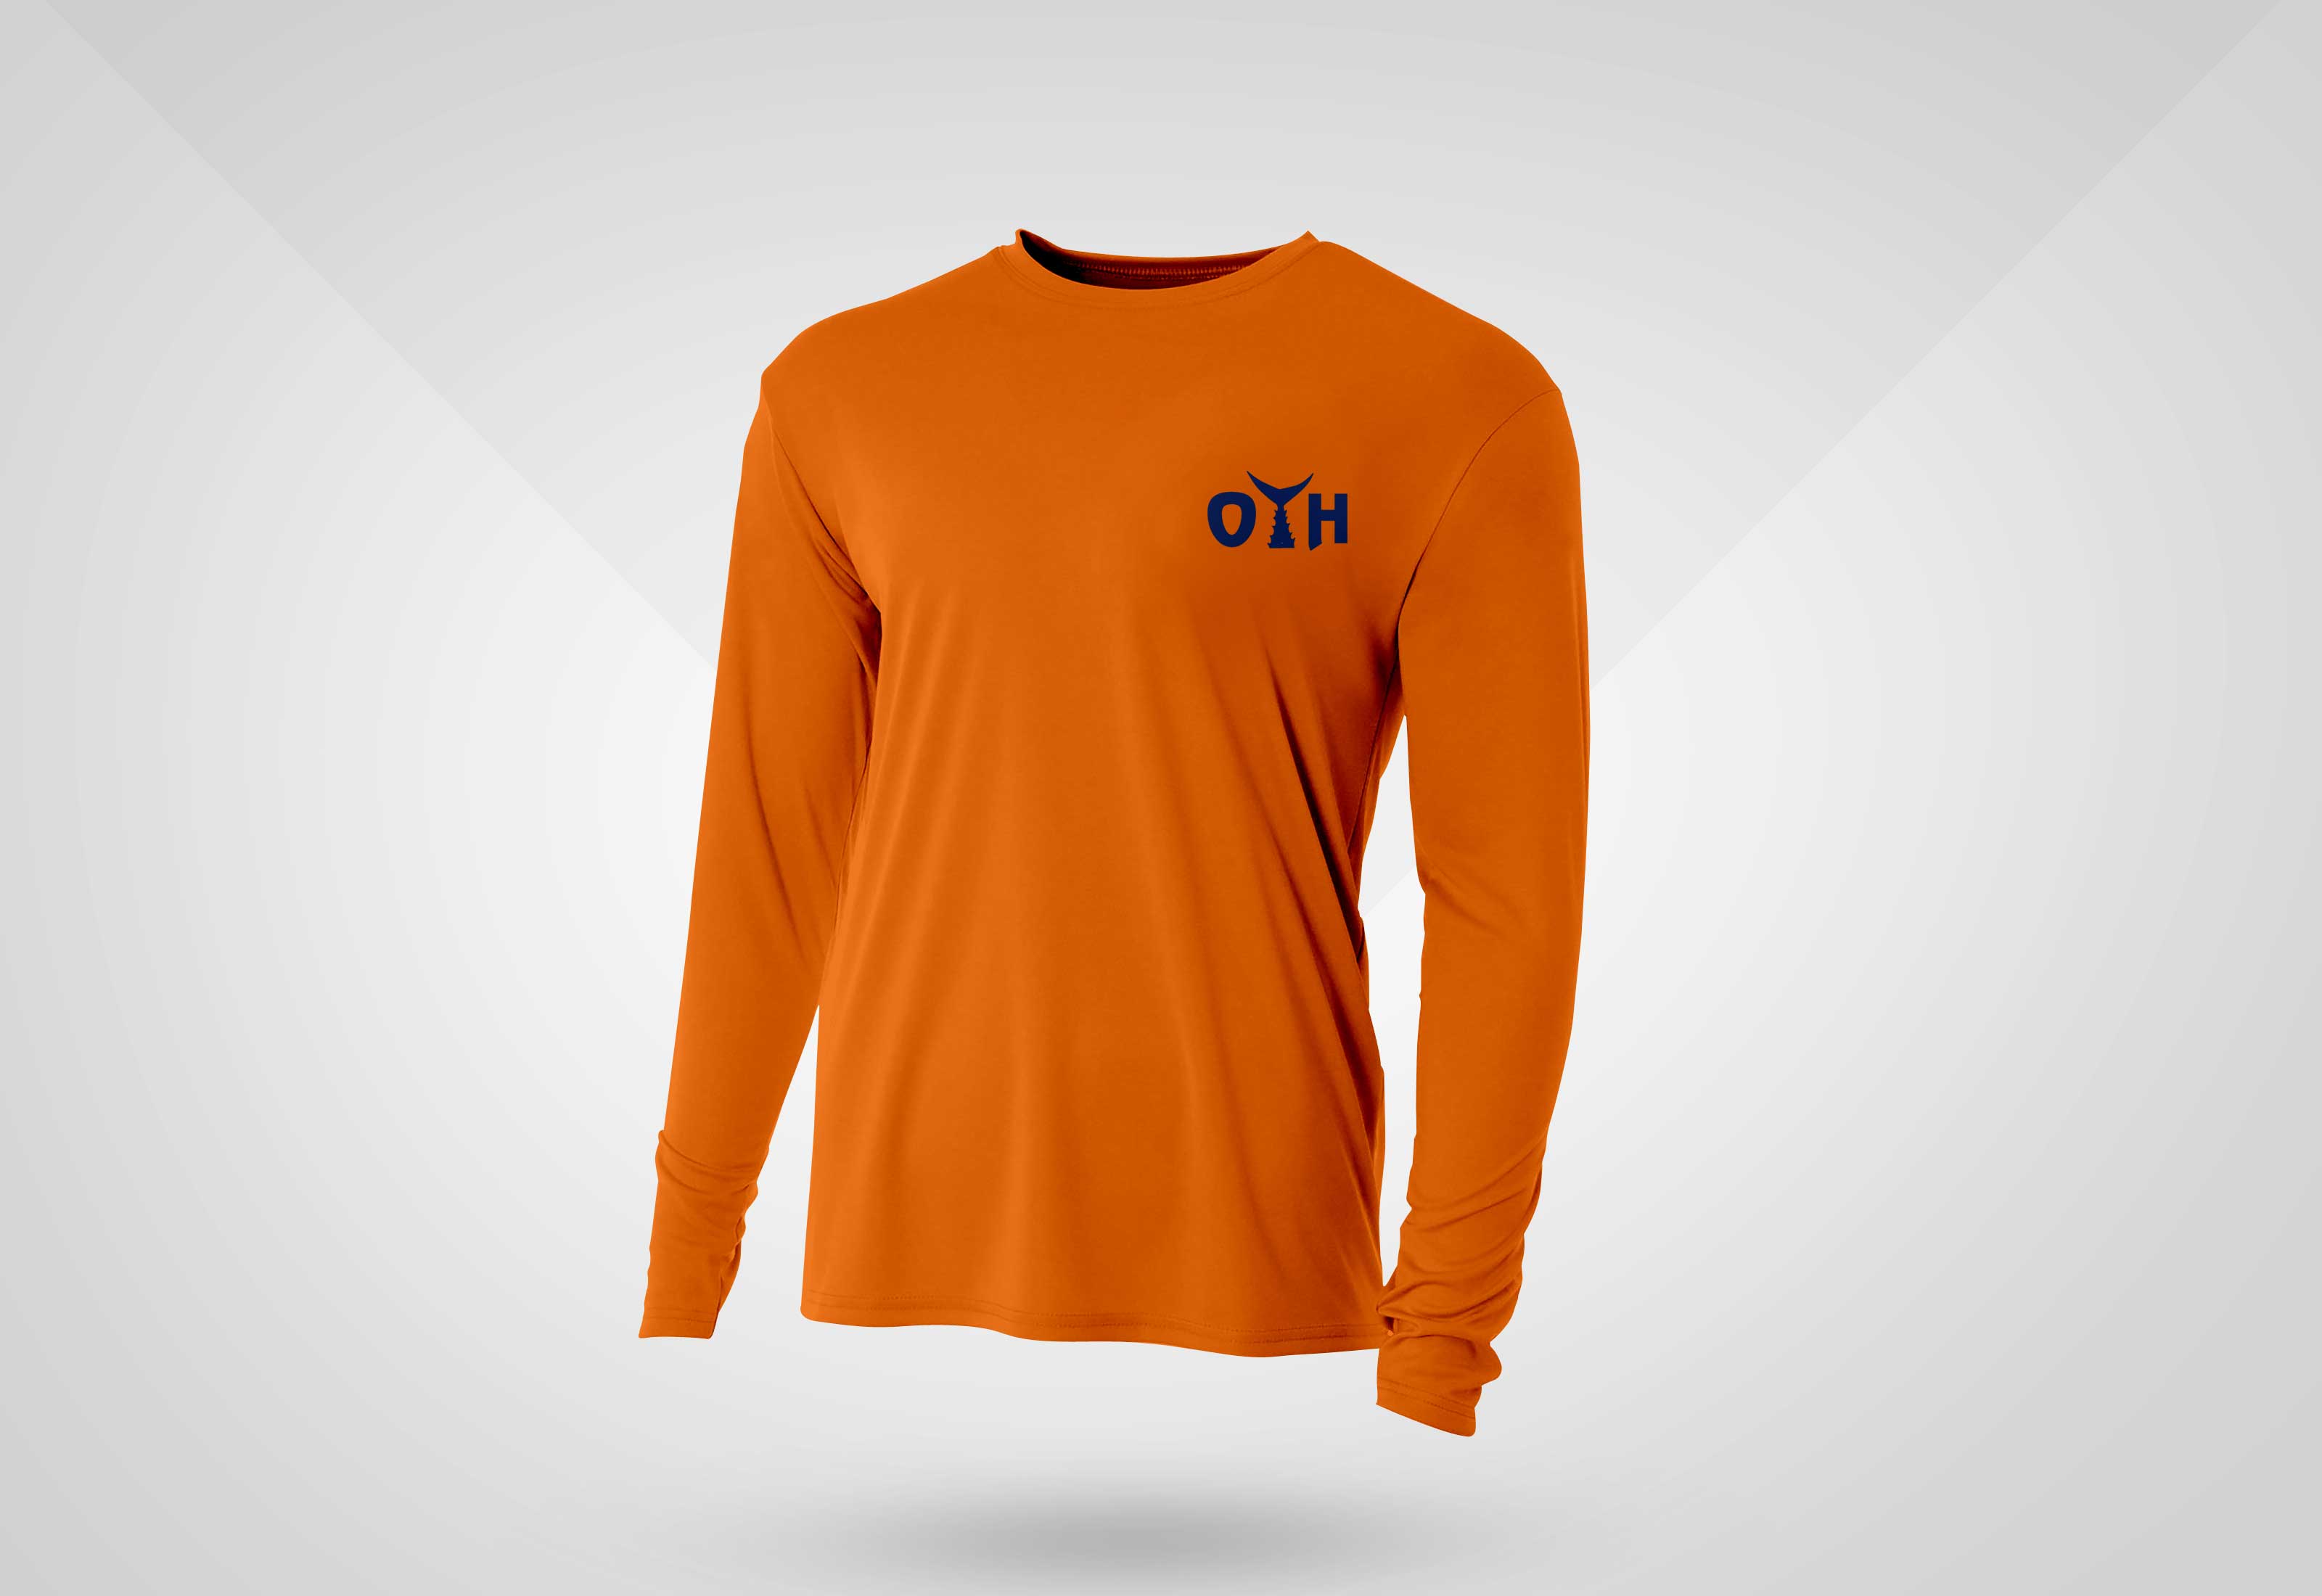 O.T.H. Athletic Performance Long-Sleeve